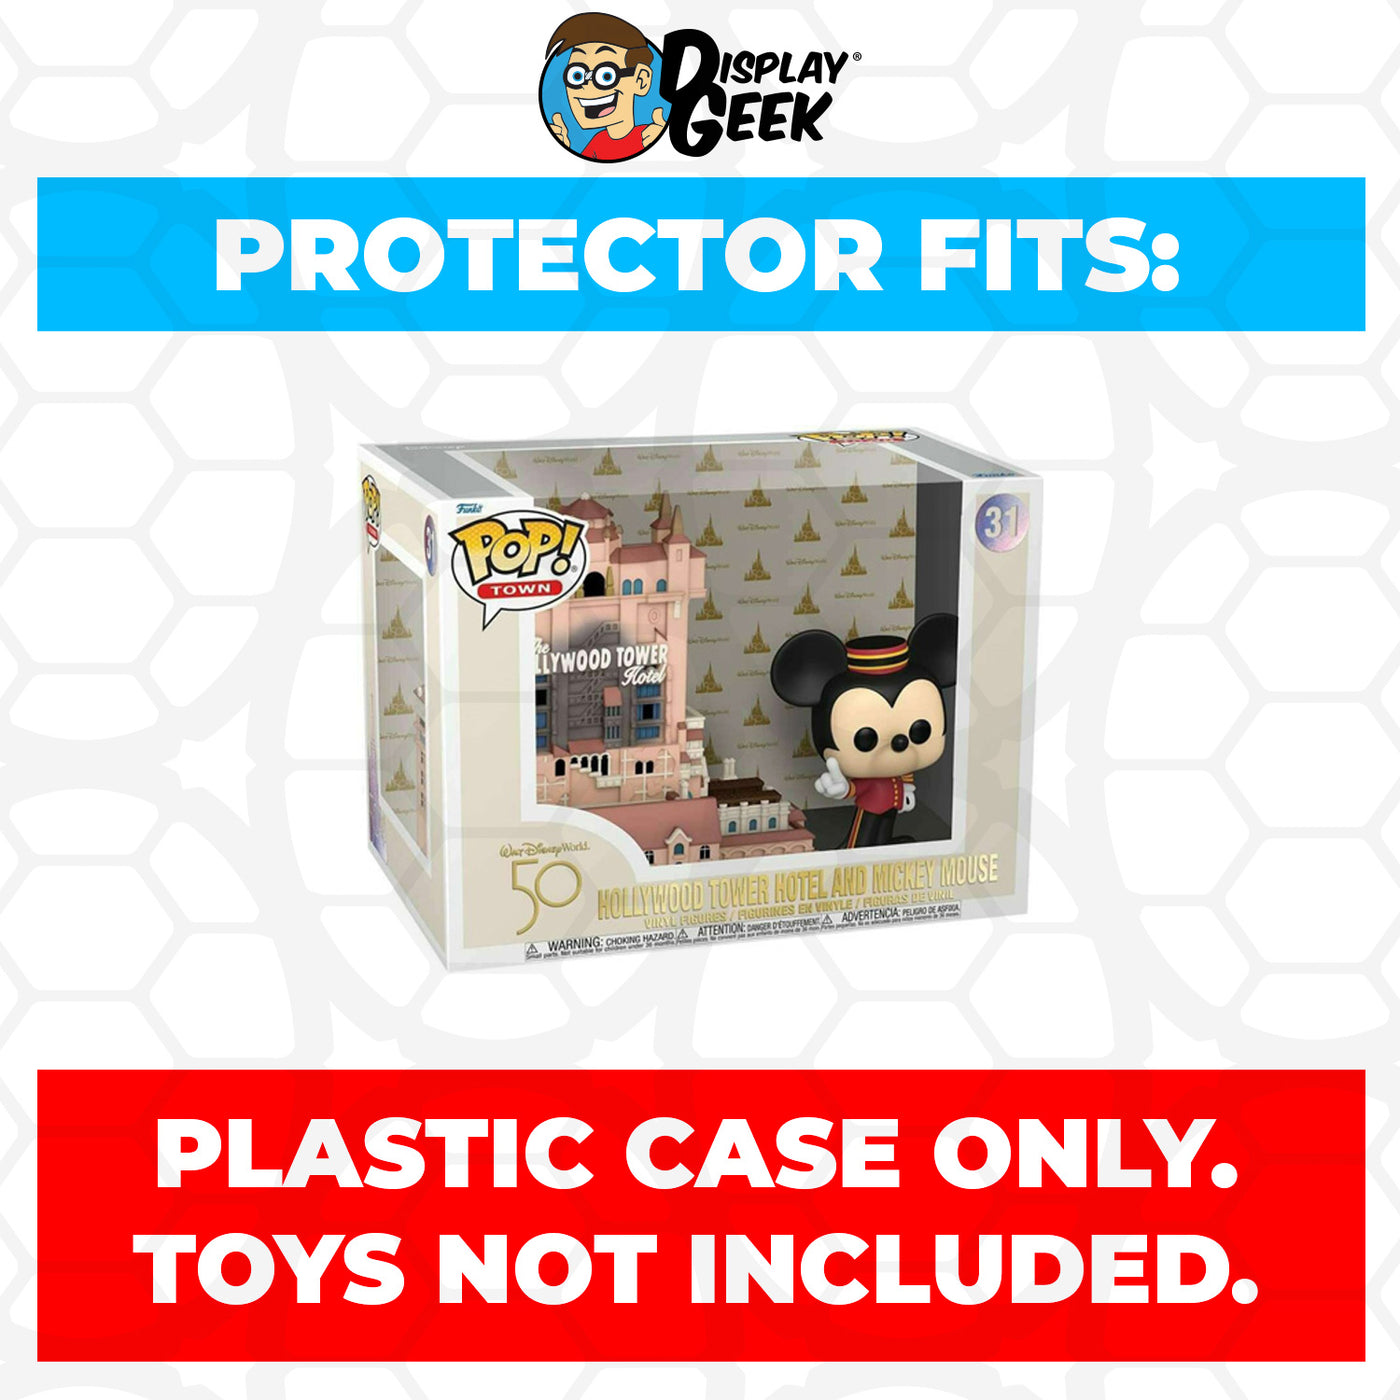 Pop Protector for Hollywood Tower Hotel and Mickey Mouse #31 Funko Pop Town on The Protector Guide App by Display Geek